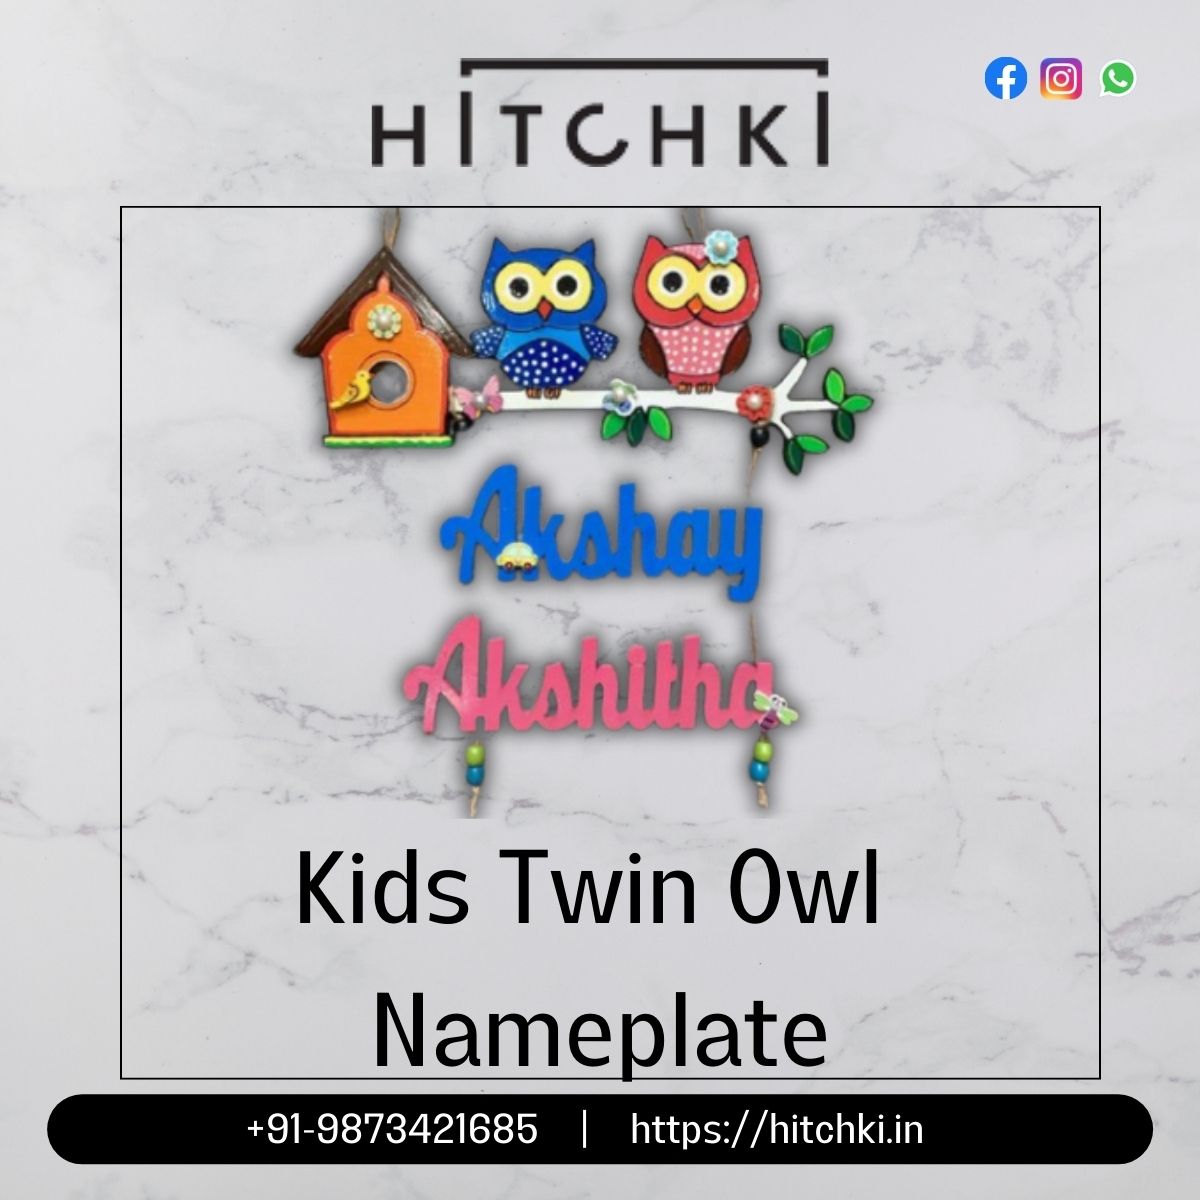 Kids Nameplates Collection Explore hitchki.in